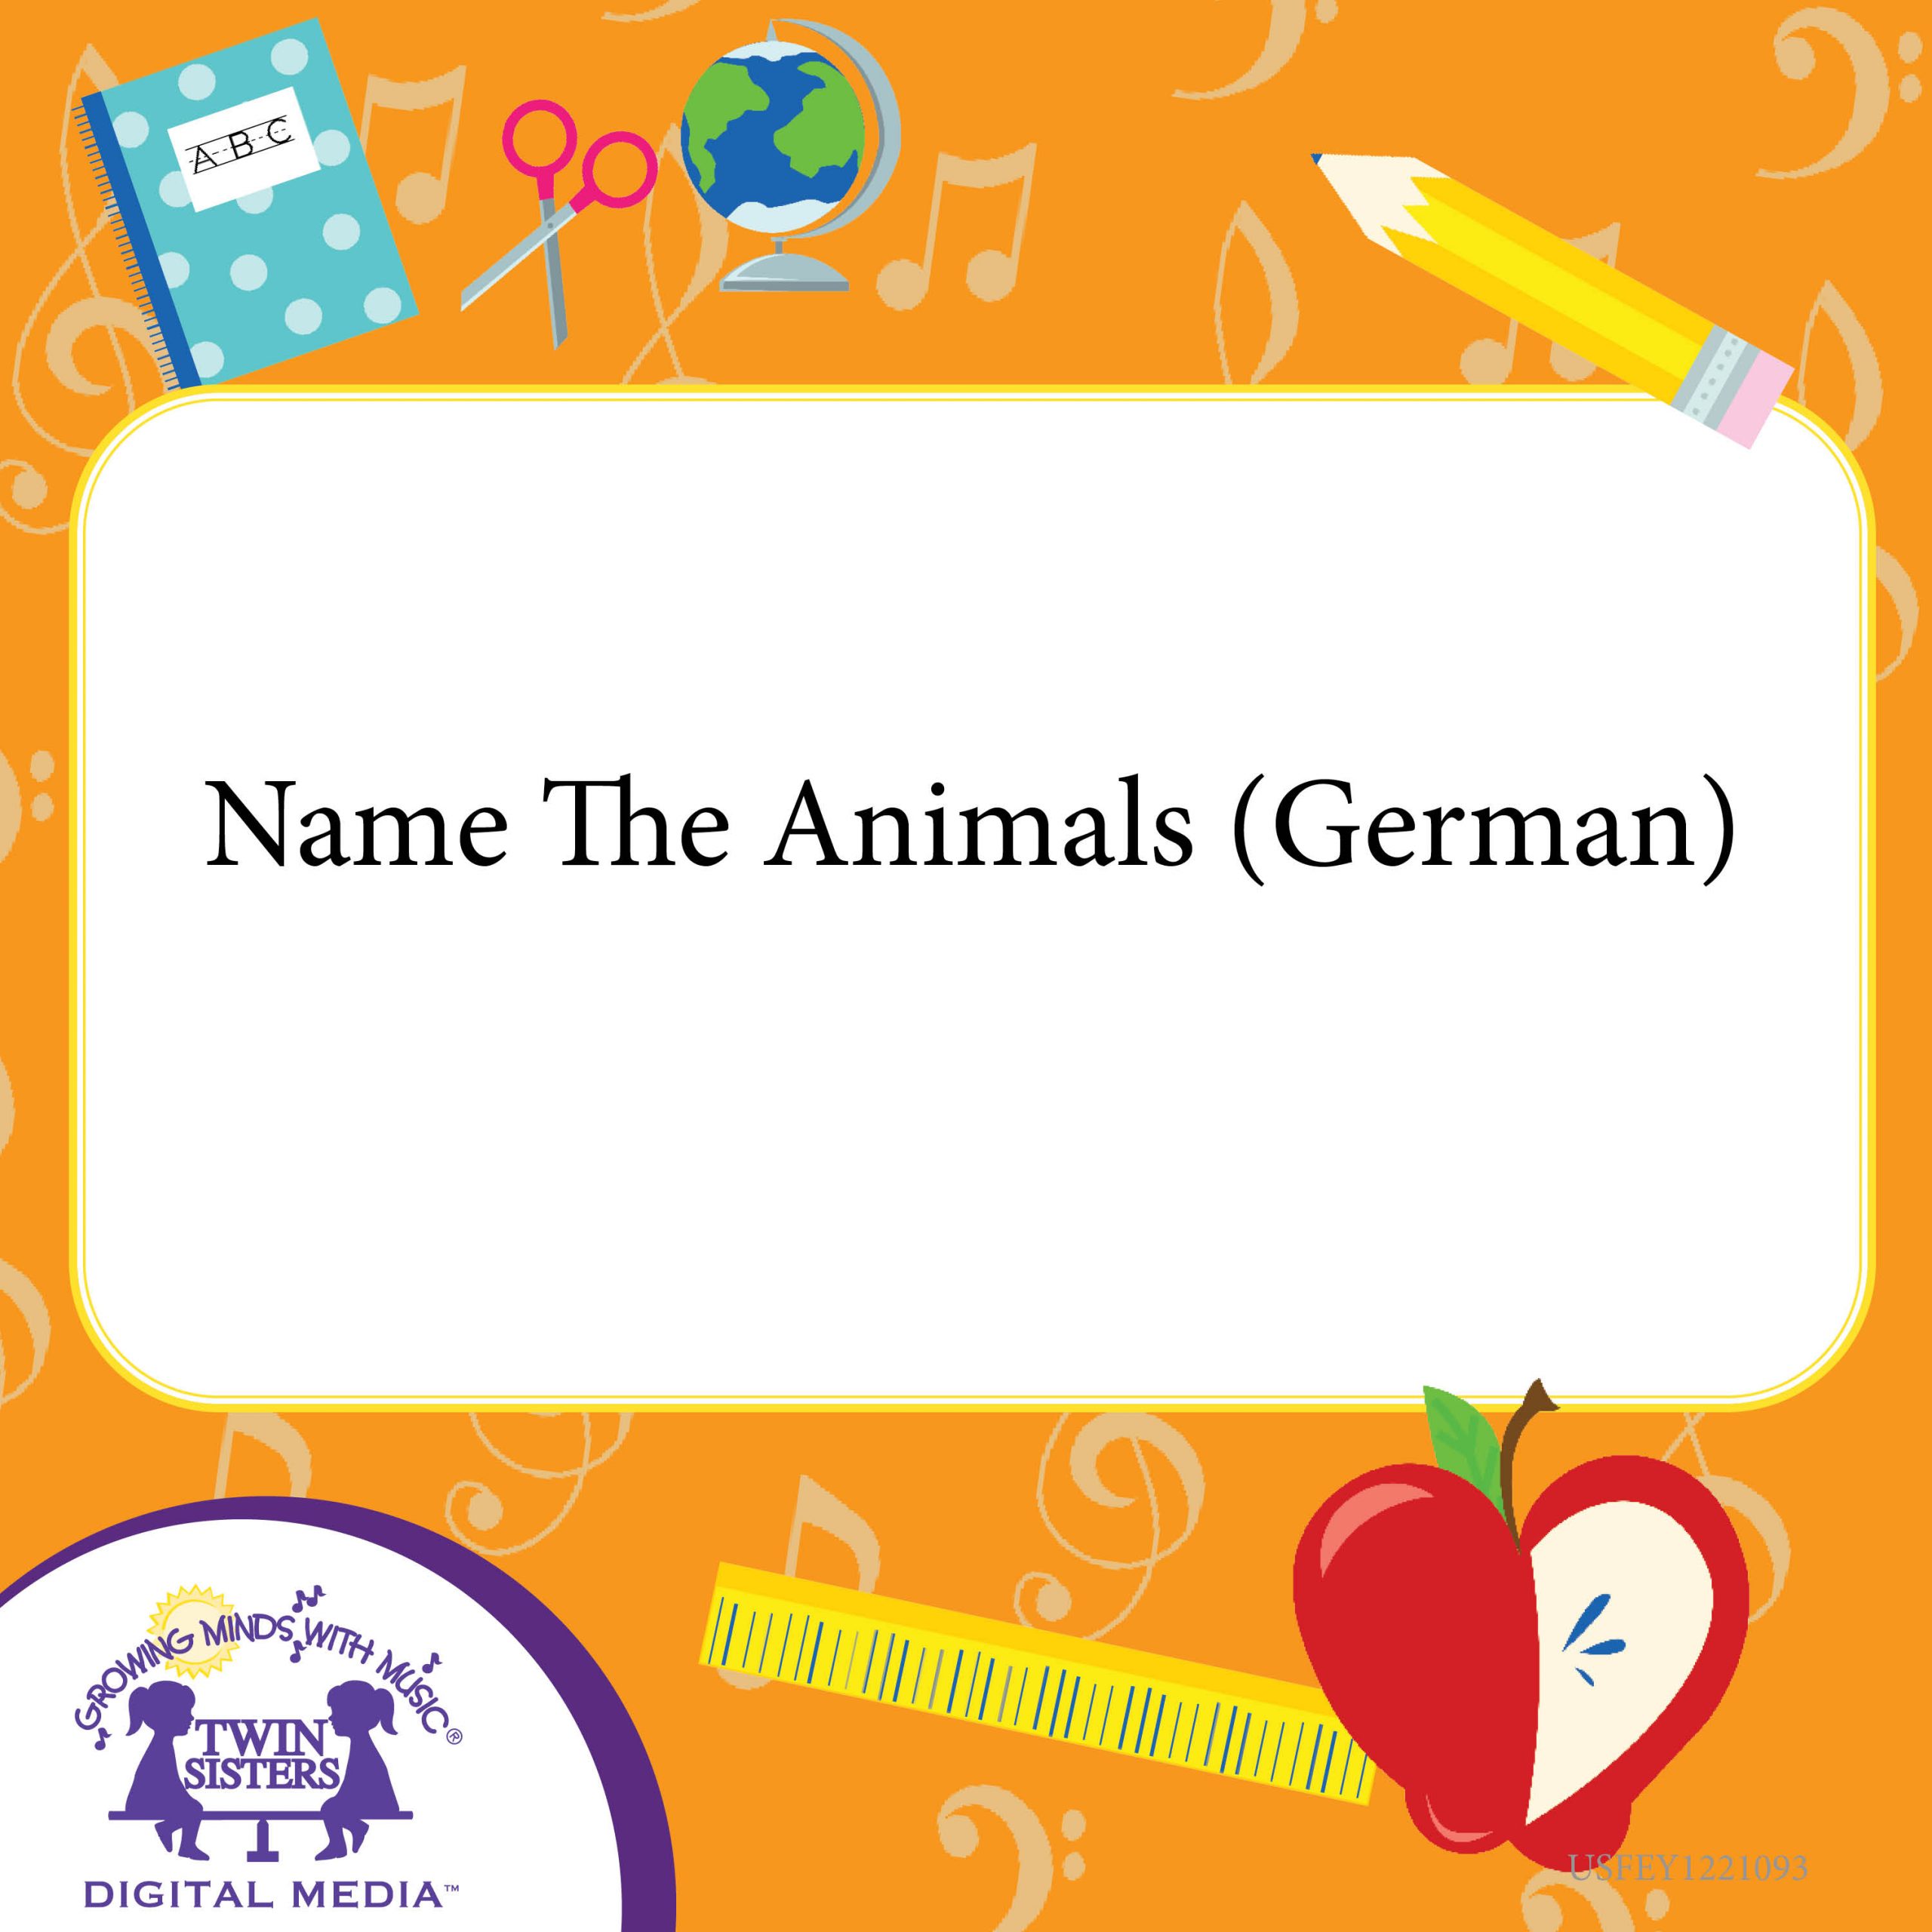 Name The Animals (German) | Twin Sisters